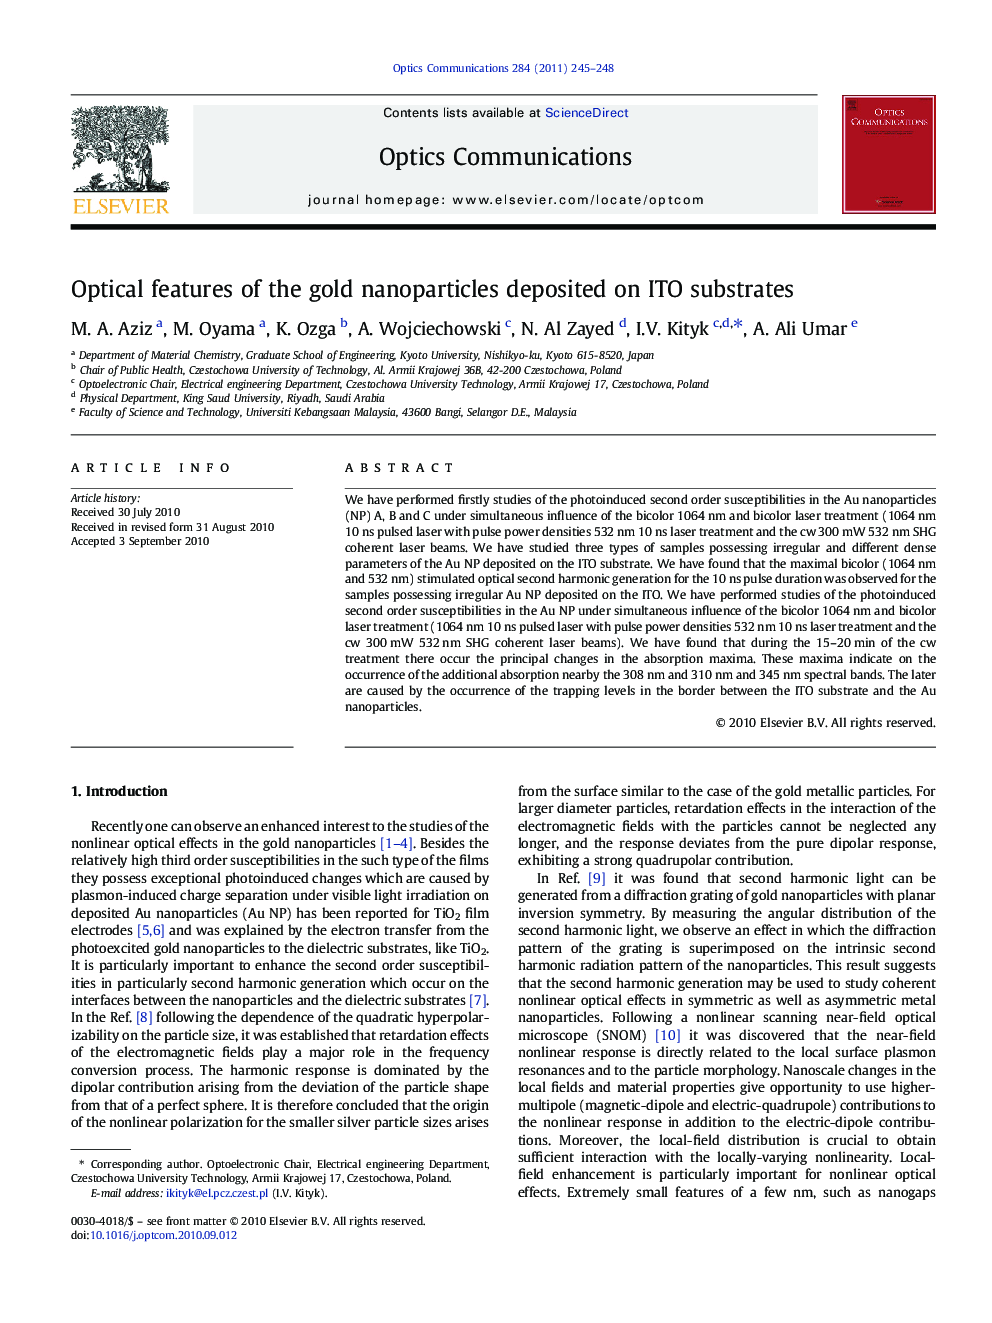 Optical features of the gold nanoparticles deposited on ITO substrates